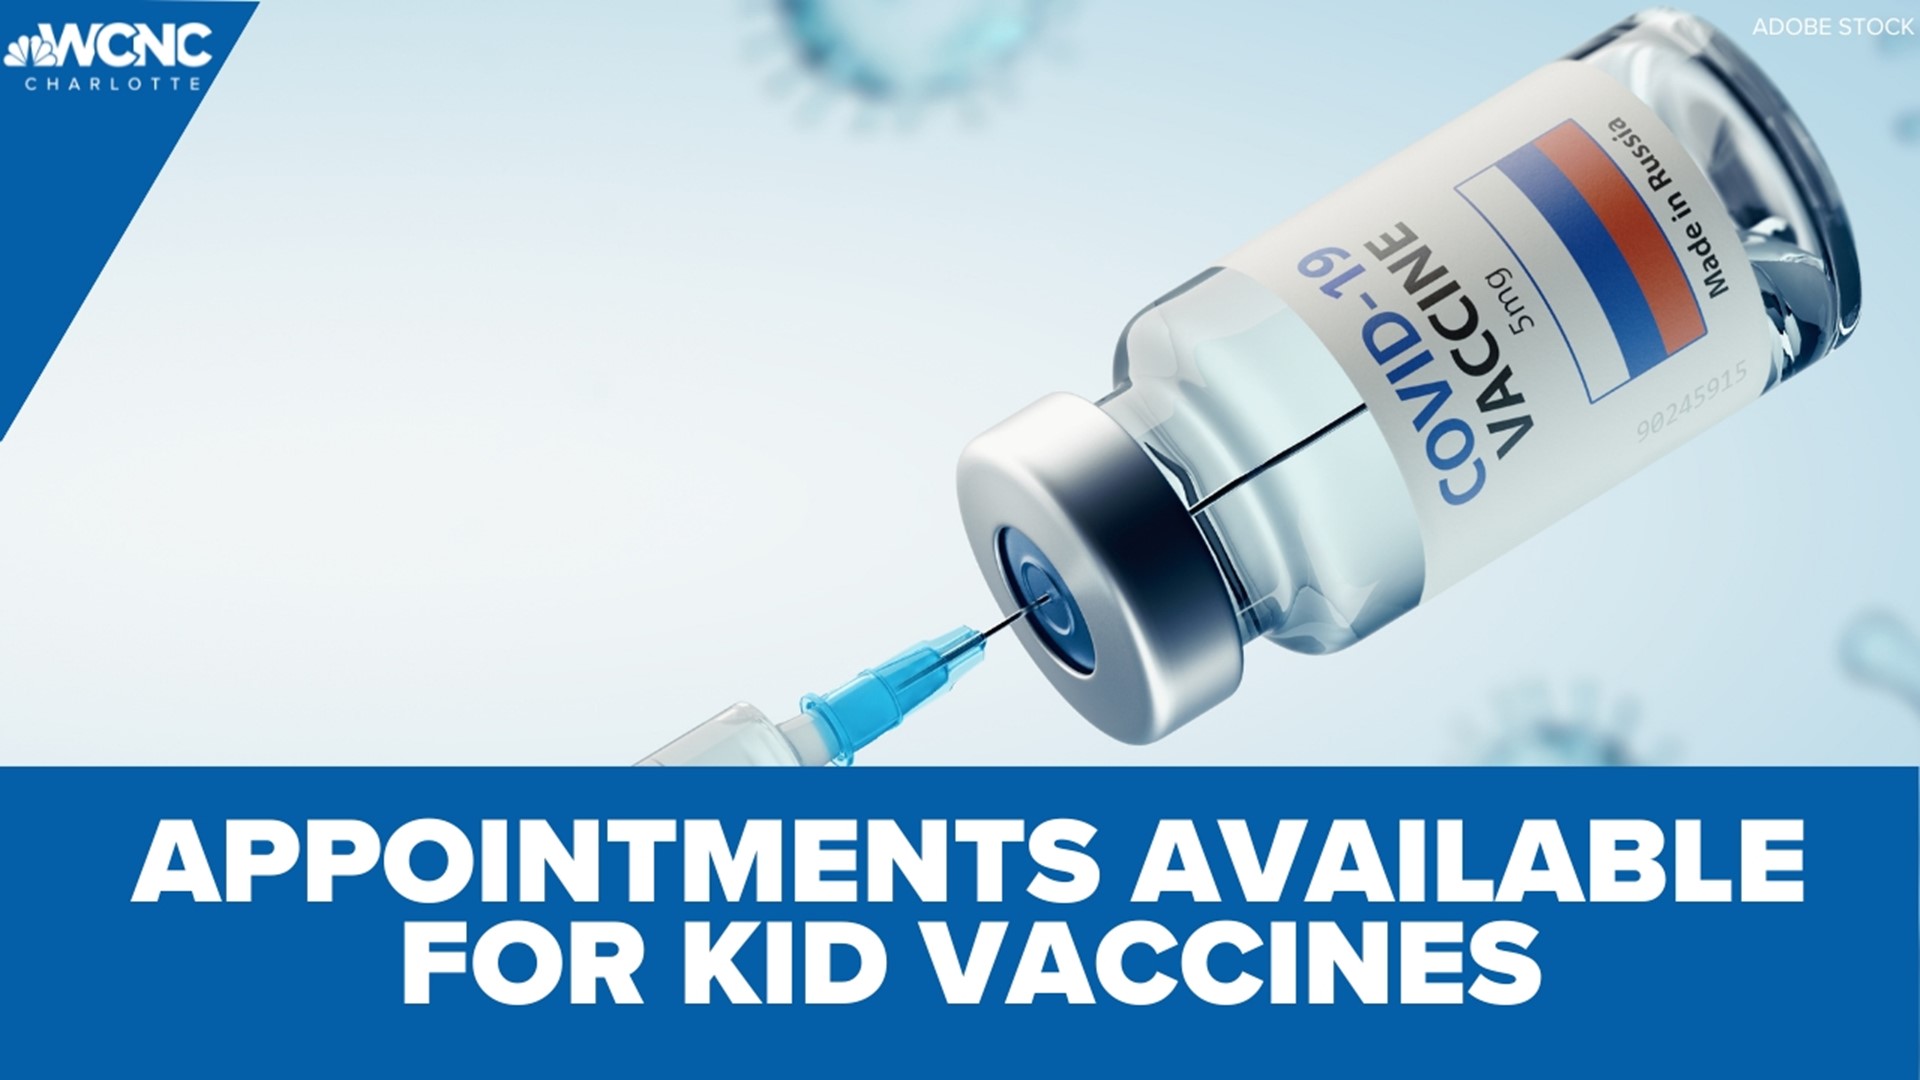 After approval from the FDA and CDC, coronavirus vaccinations are available for the first time for children as young as 6 months old.